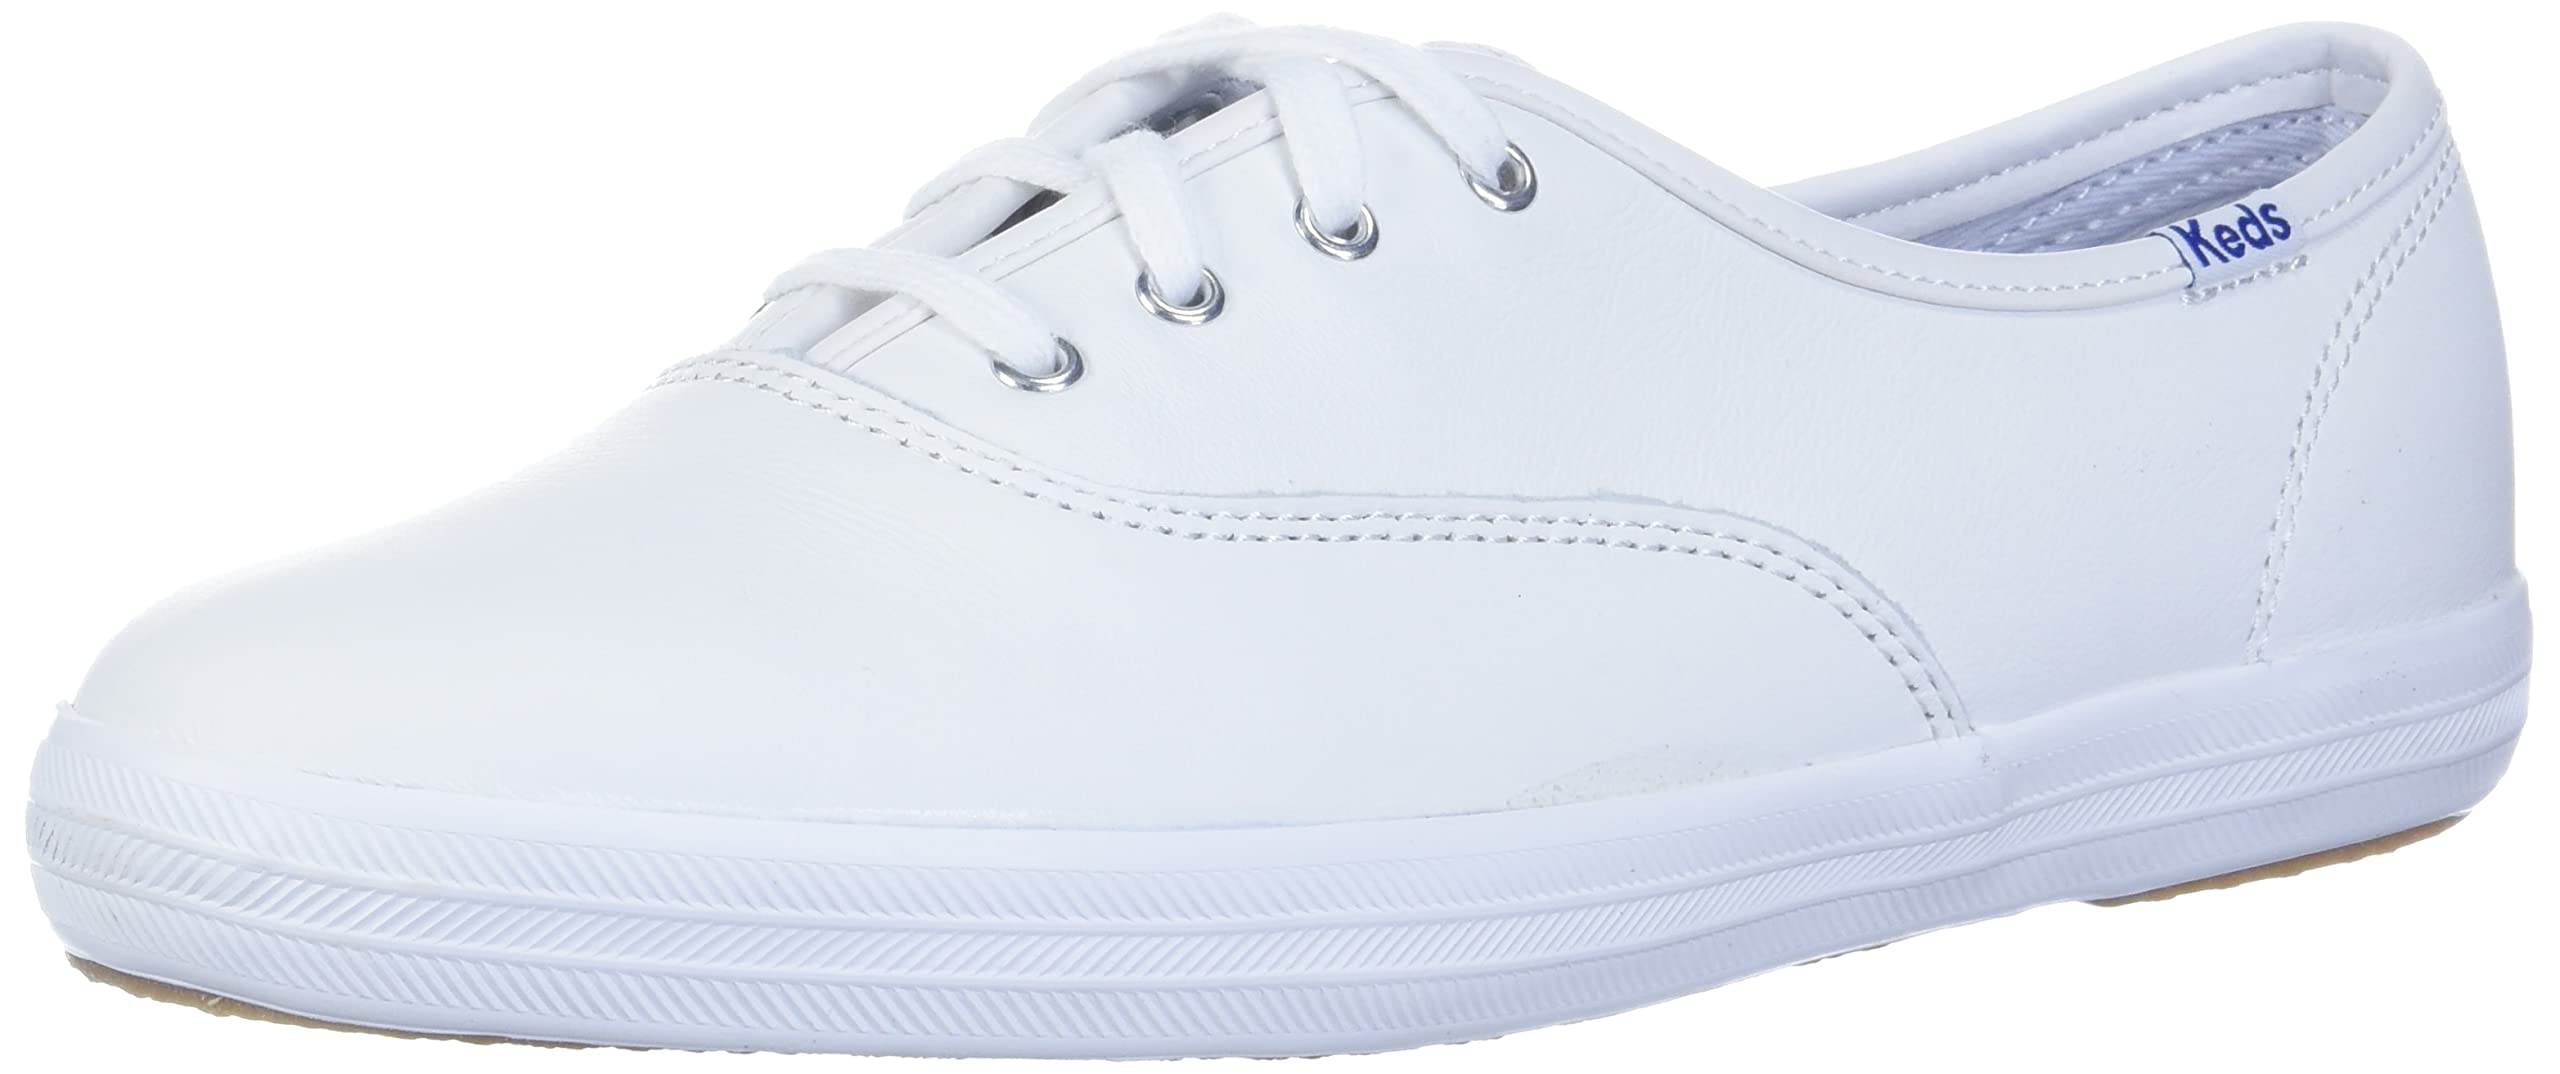 Keds Women's Champion Slip-On Shoes (White) $20 + Free Shipping w/ Prime or on $25+